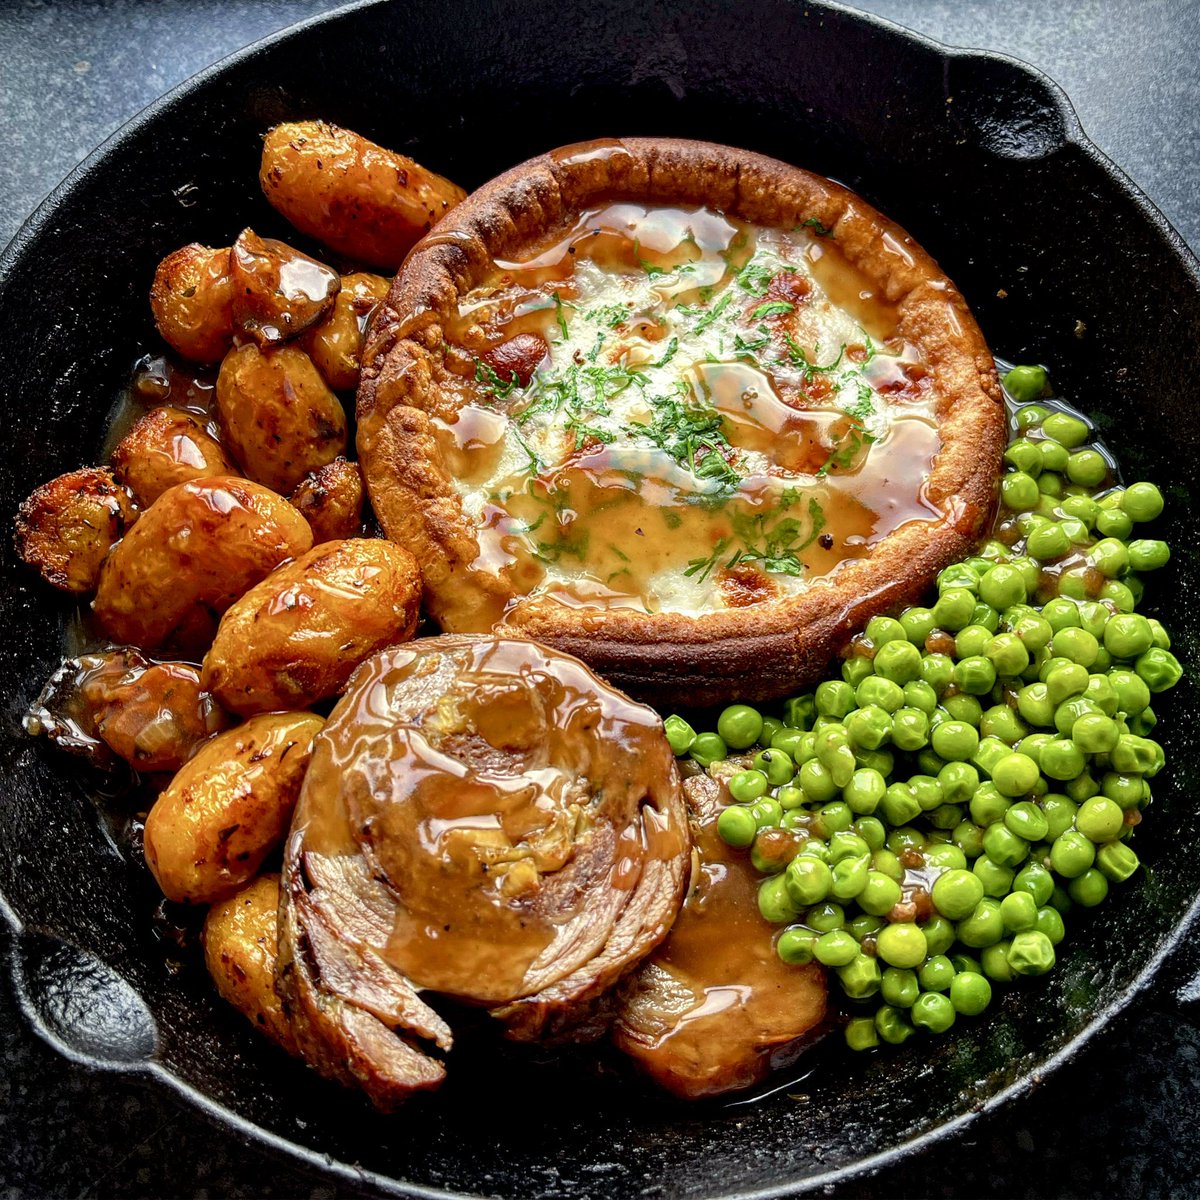 the best primary school dinner you've ever had · im now sold you can make tinned potatoes & carrots taste amazing, rolled lamb shoulder stuffed with venison & aromatics, a tiny cheesy yorkshire, lamb jus & PEAS